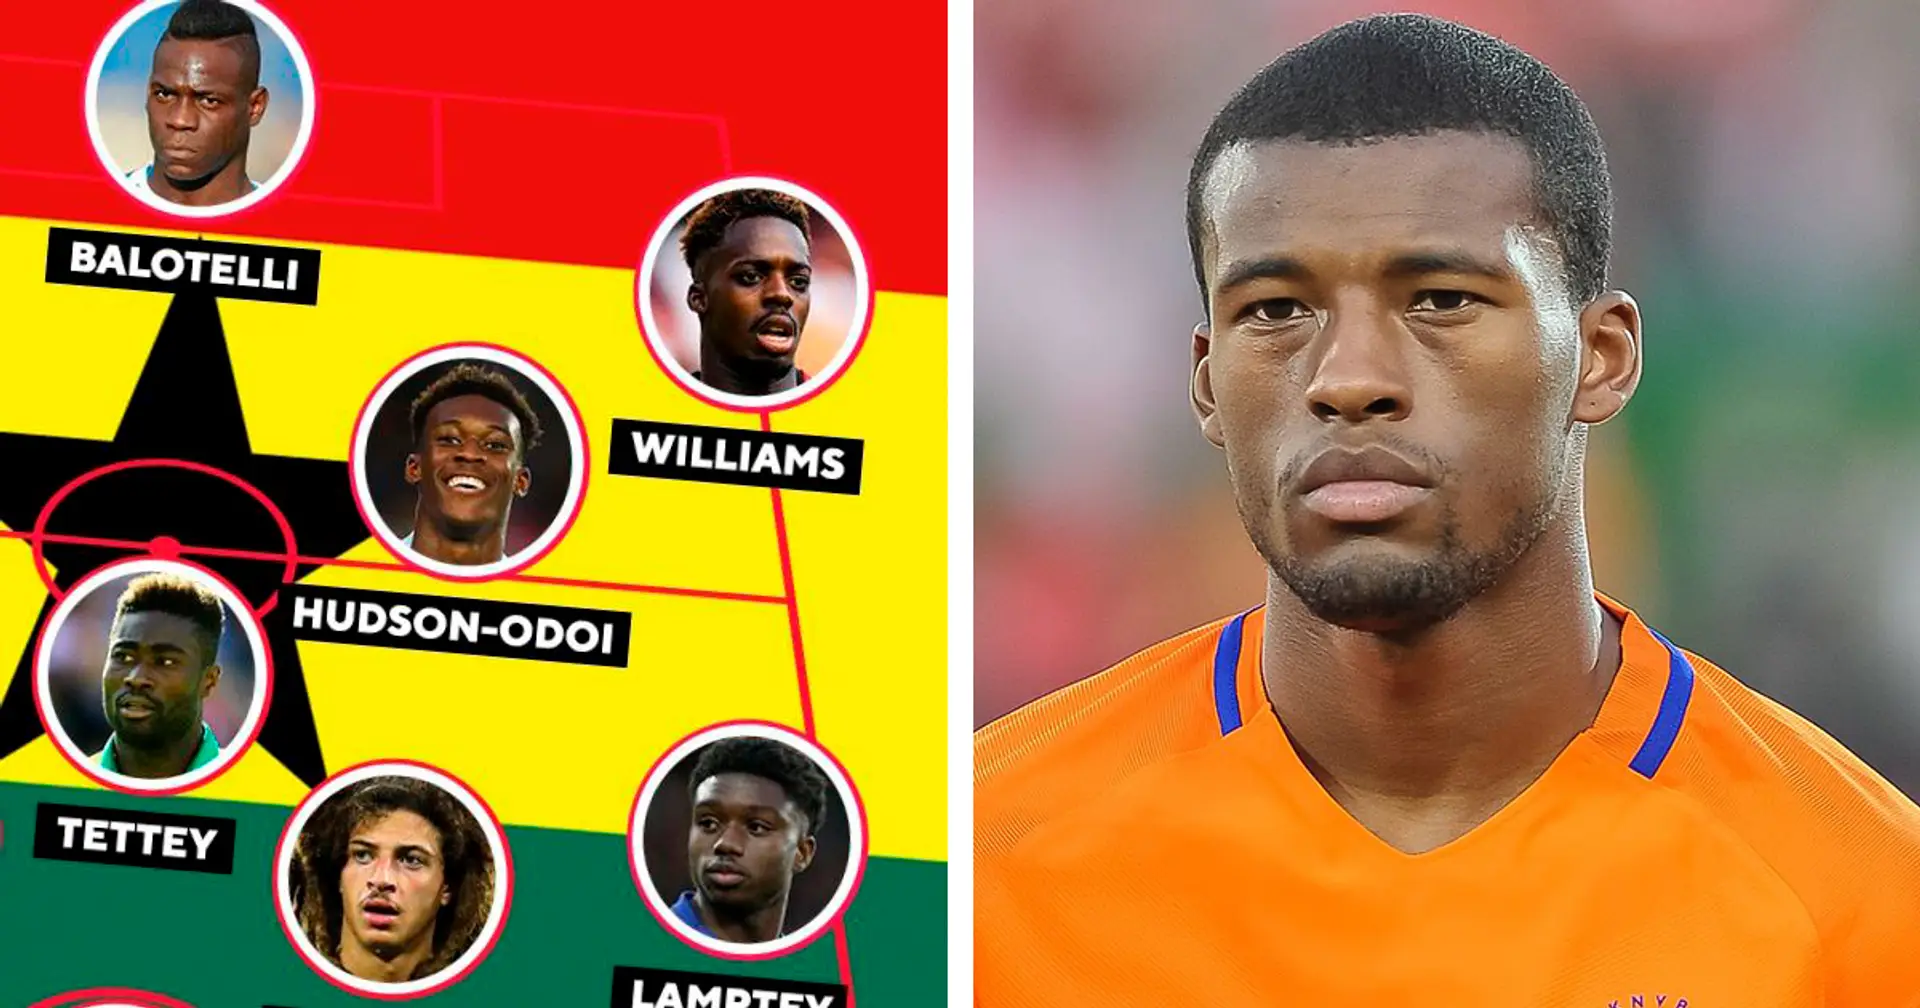 Wijnaldum, Balotelli, Boateng: What Ghana national team would be like if every eligible player chose them